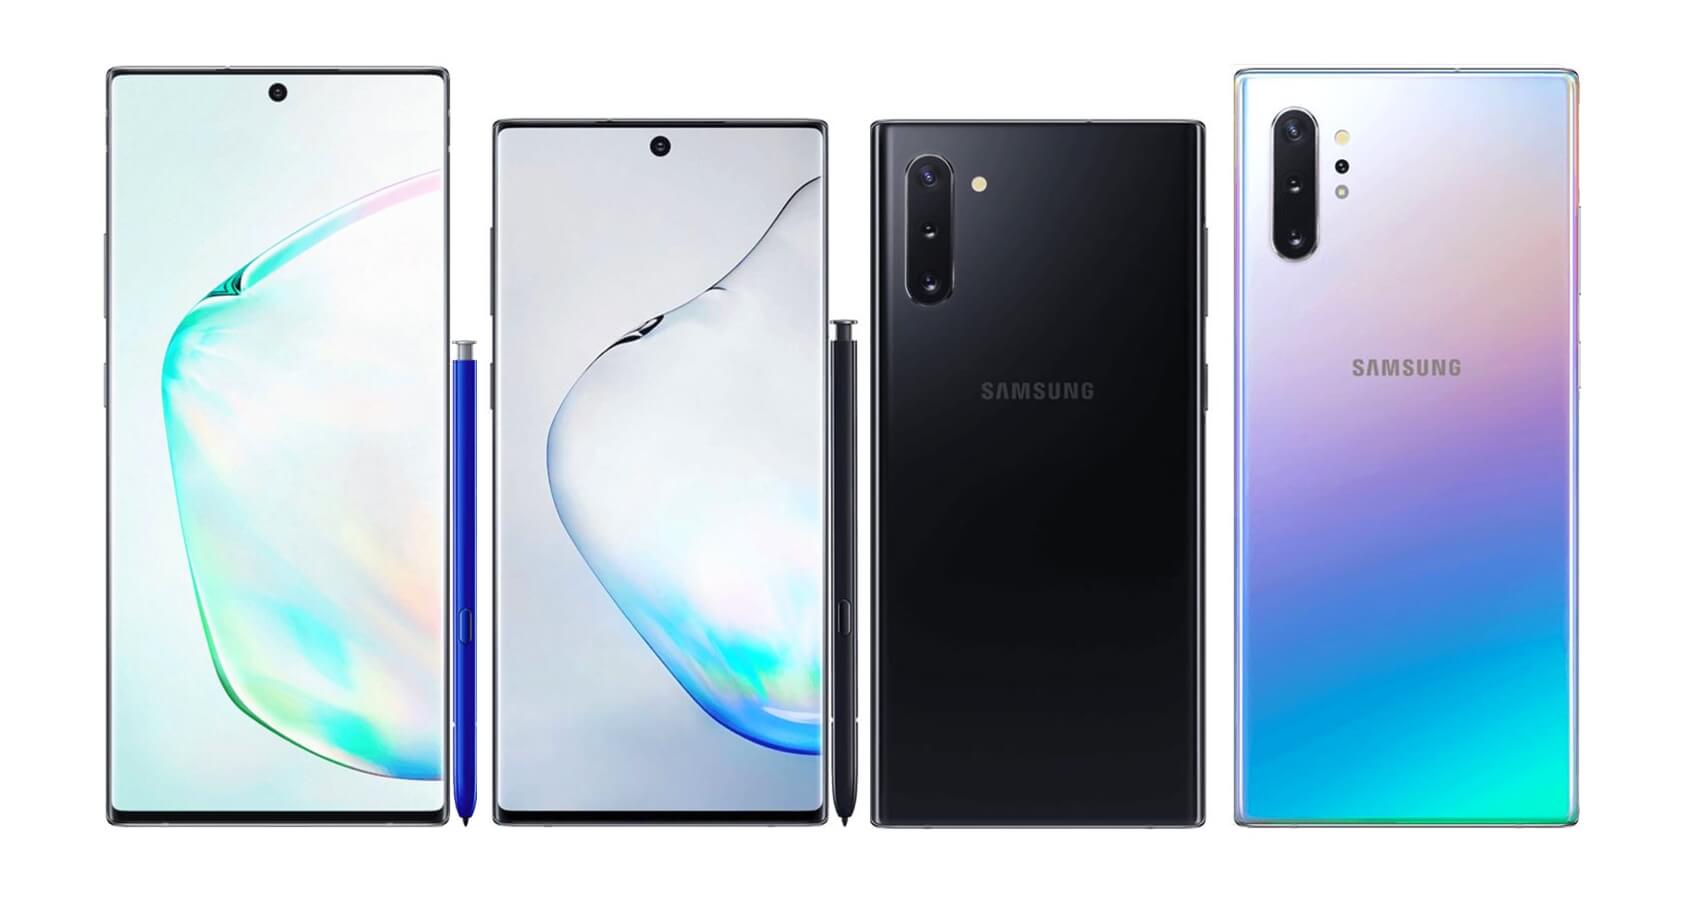 Galaxy Note 10 and Galaxy Note 10 Plus